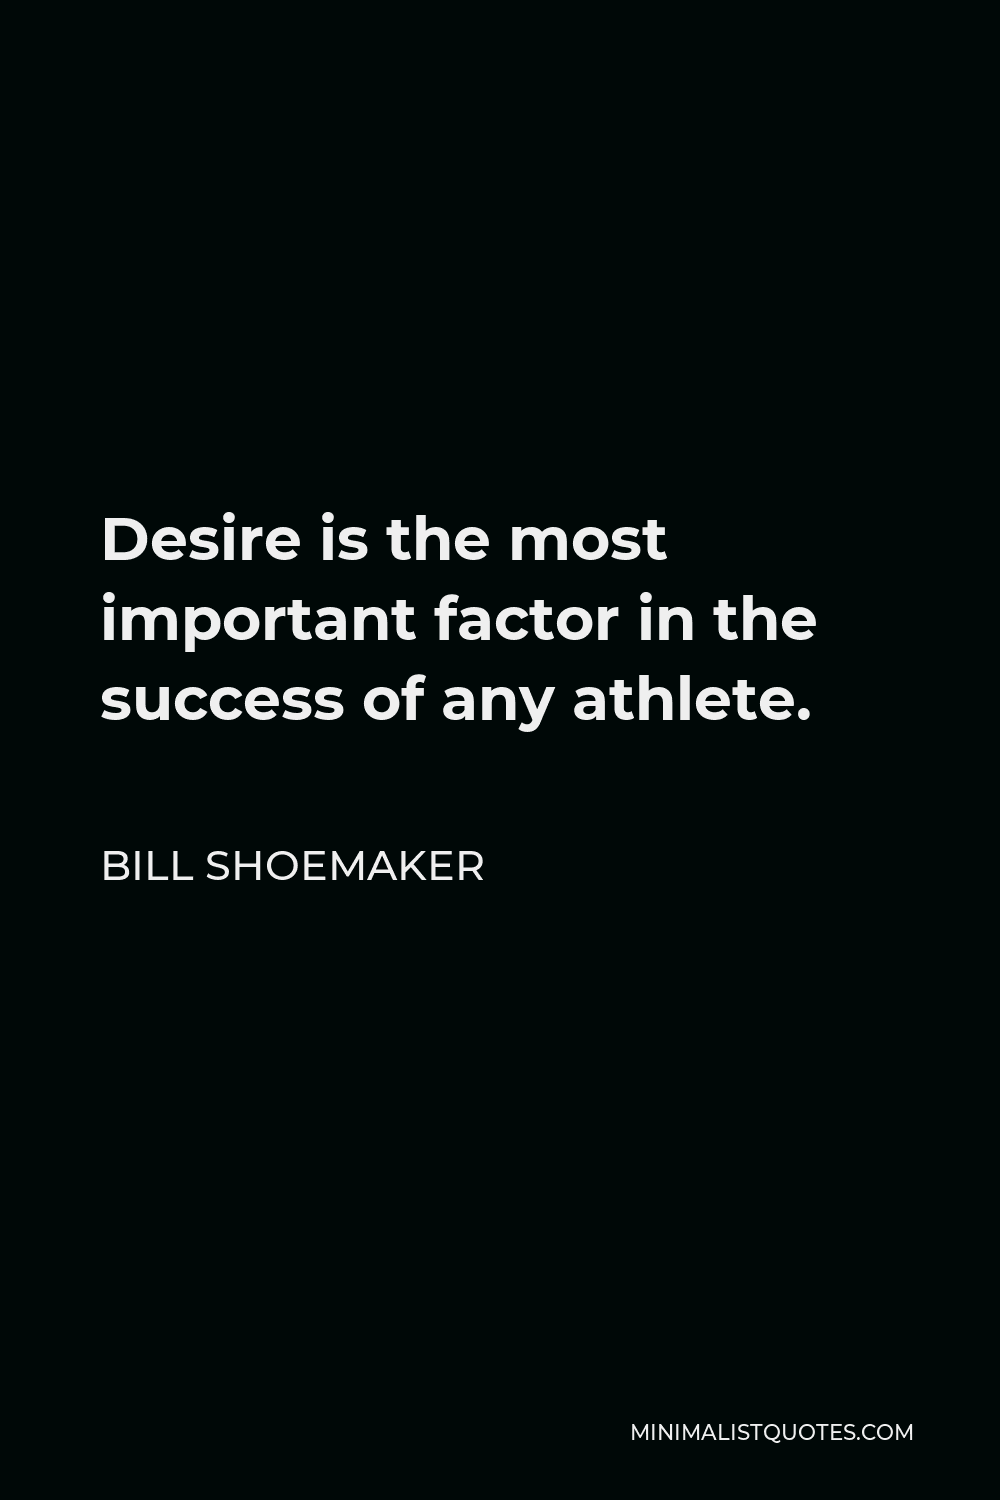 Bill Shoemaker Quote - Desire is the most important factor in the success of any athlete.